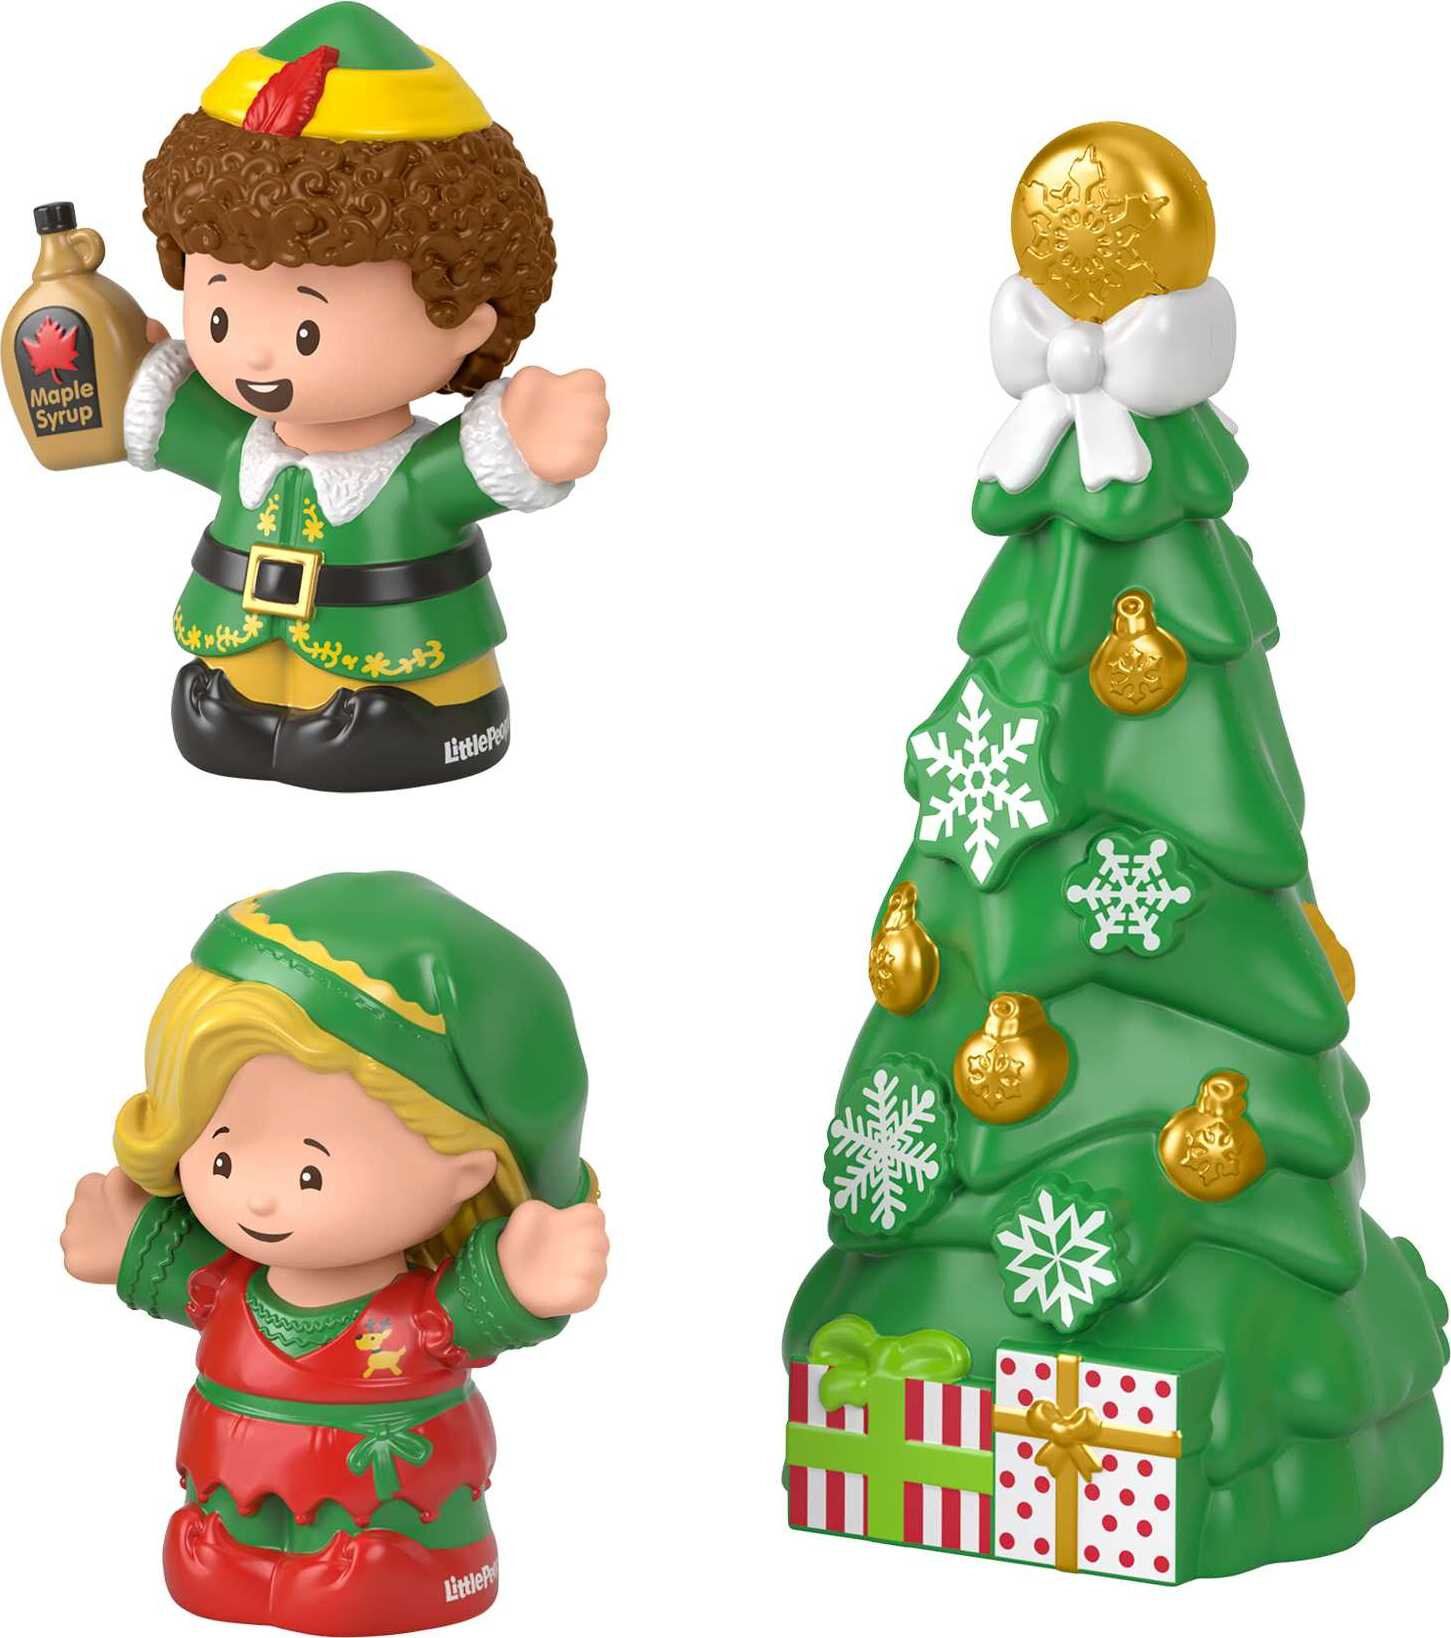 Little People Collector Elf Movie Special Edition Figure Set in Christmas Box for Adults & Fans - image 5 of 7